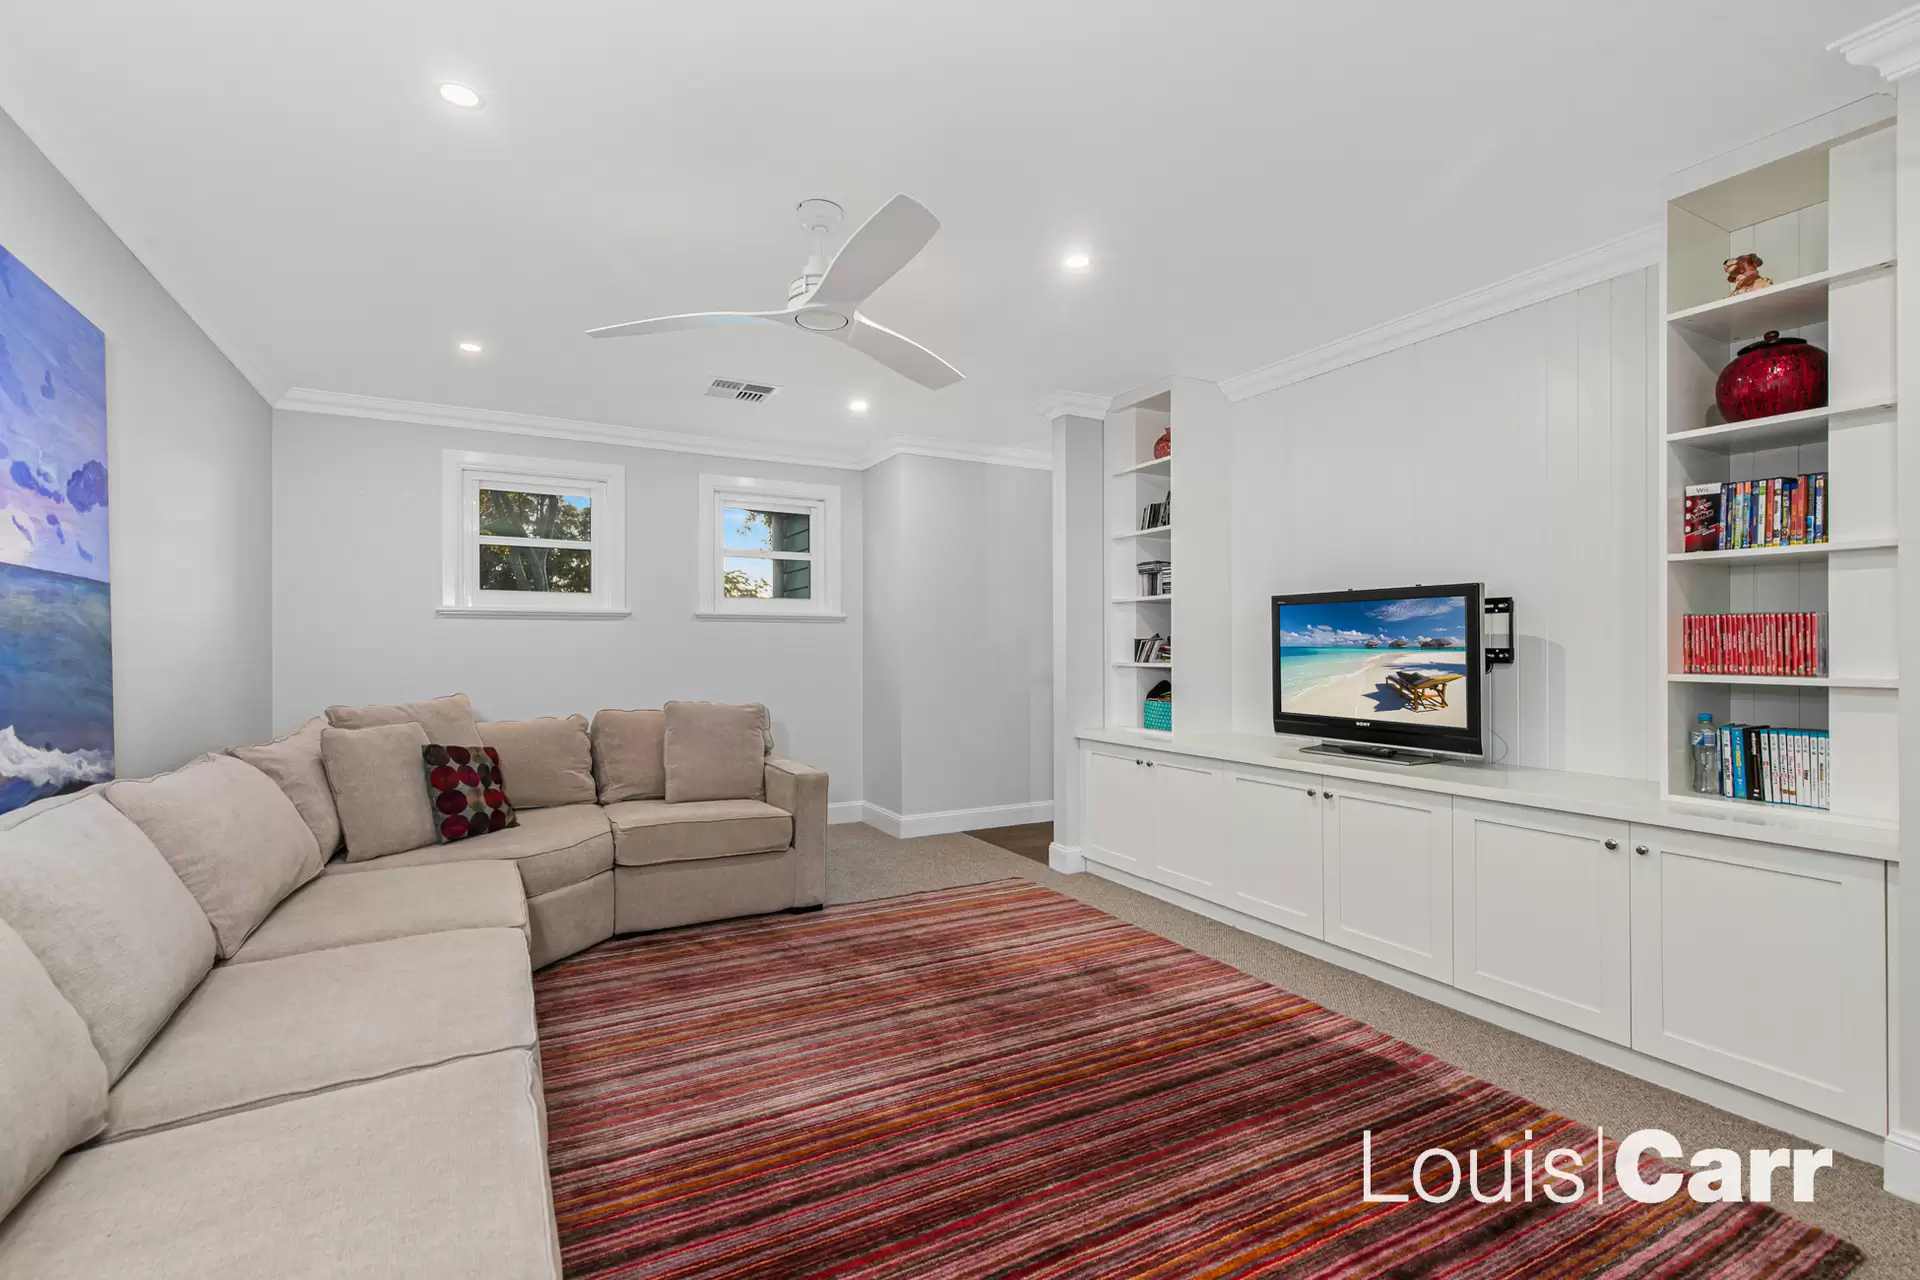 Photo #7: 59 Loftus Road, Pennant Hills - Auction by Louis Carr Real Estate